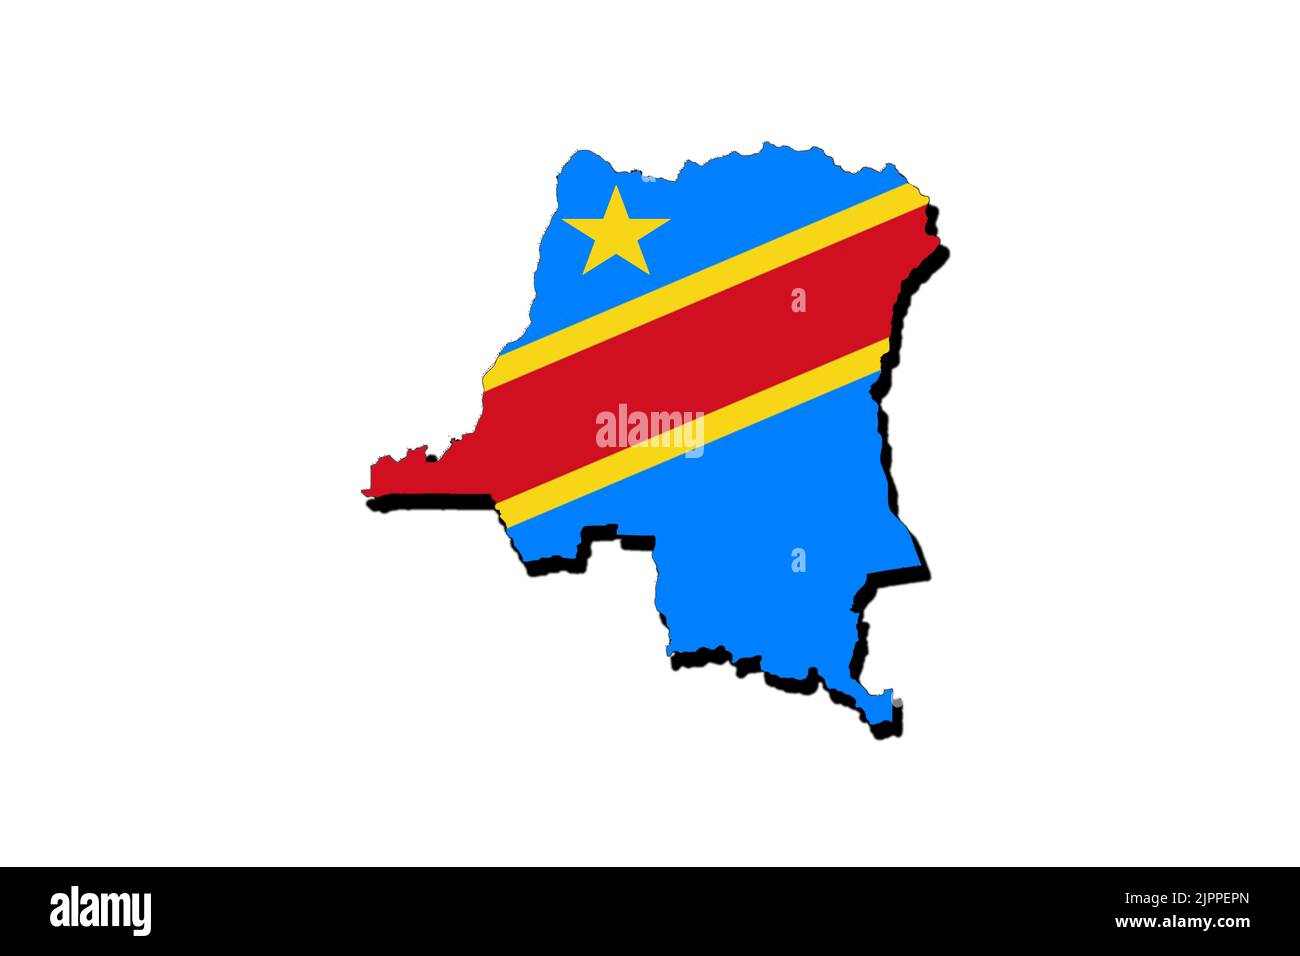 Silhouette of the map of Democratic Republic of Congo with its flag Stock Photo